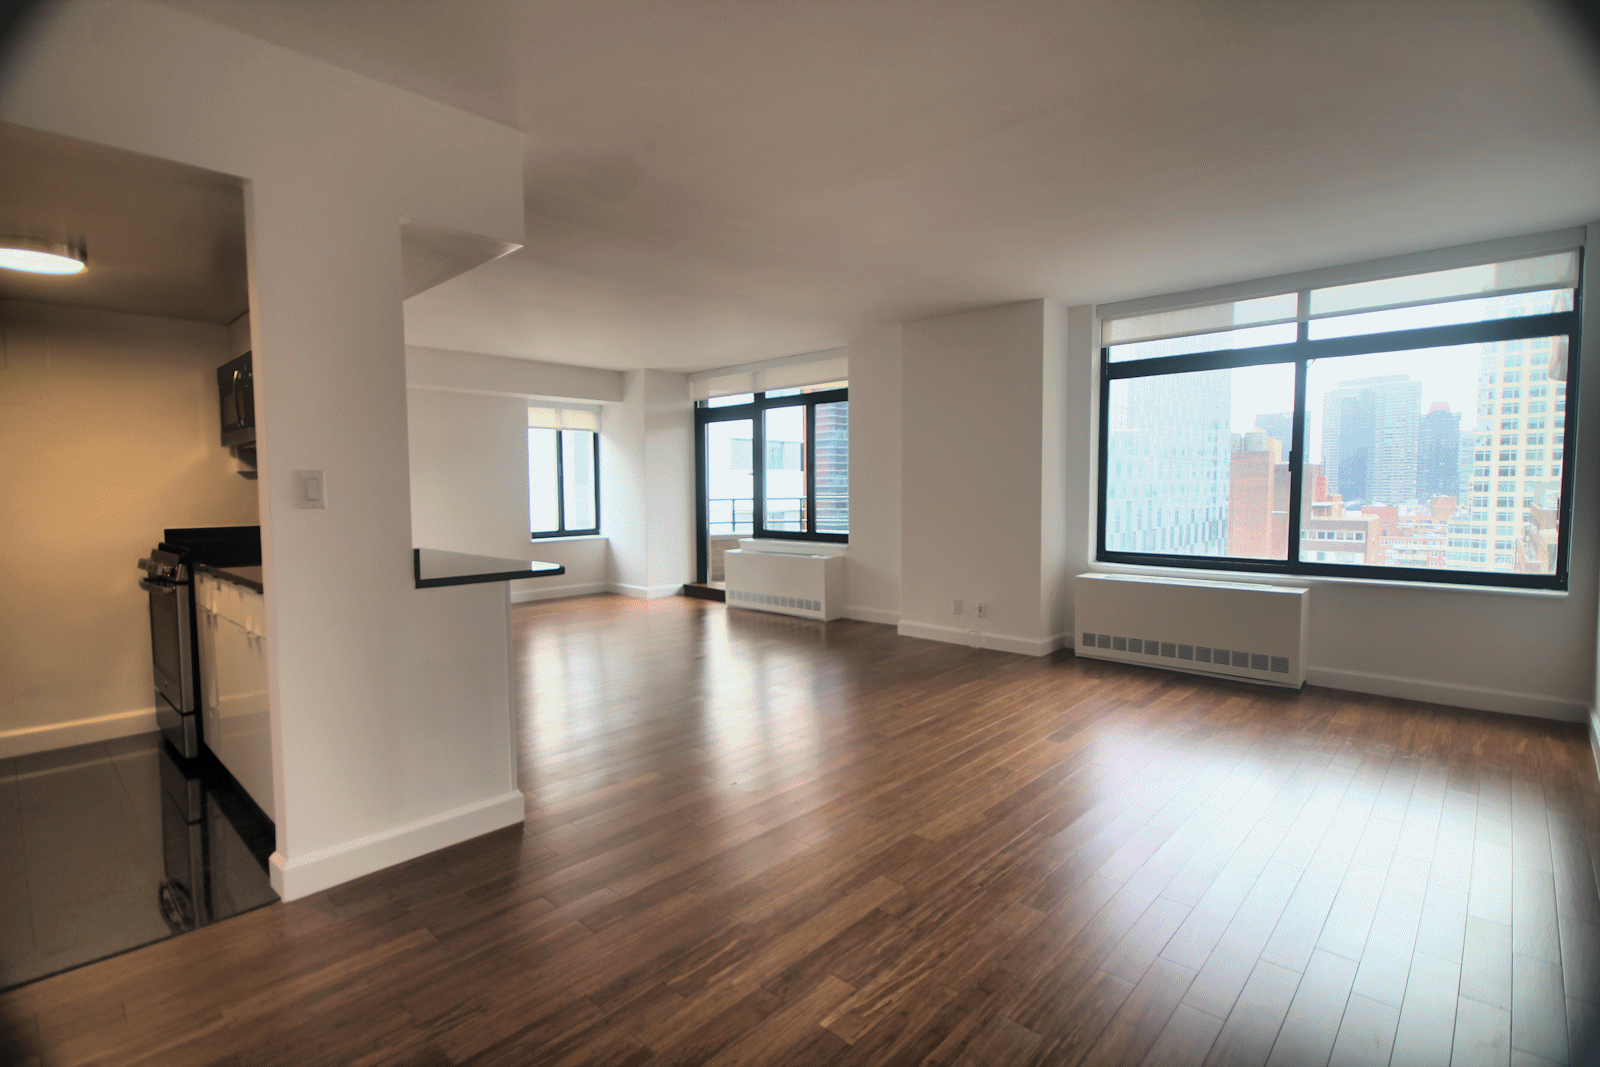 TOTAL Gut Renovation Facing South And East River amp ; Bridge Views Very Bright 1 Bedroom Hi Floor LARGE BALCONY 24 7 DM Elevator Gym Finishes Kitchen includes GE Profile ...